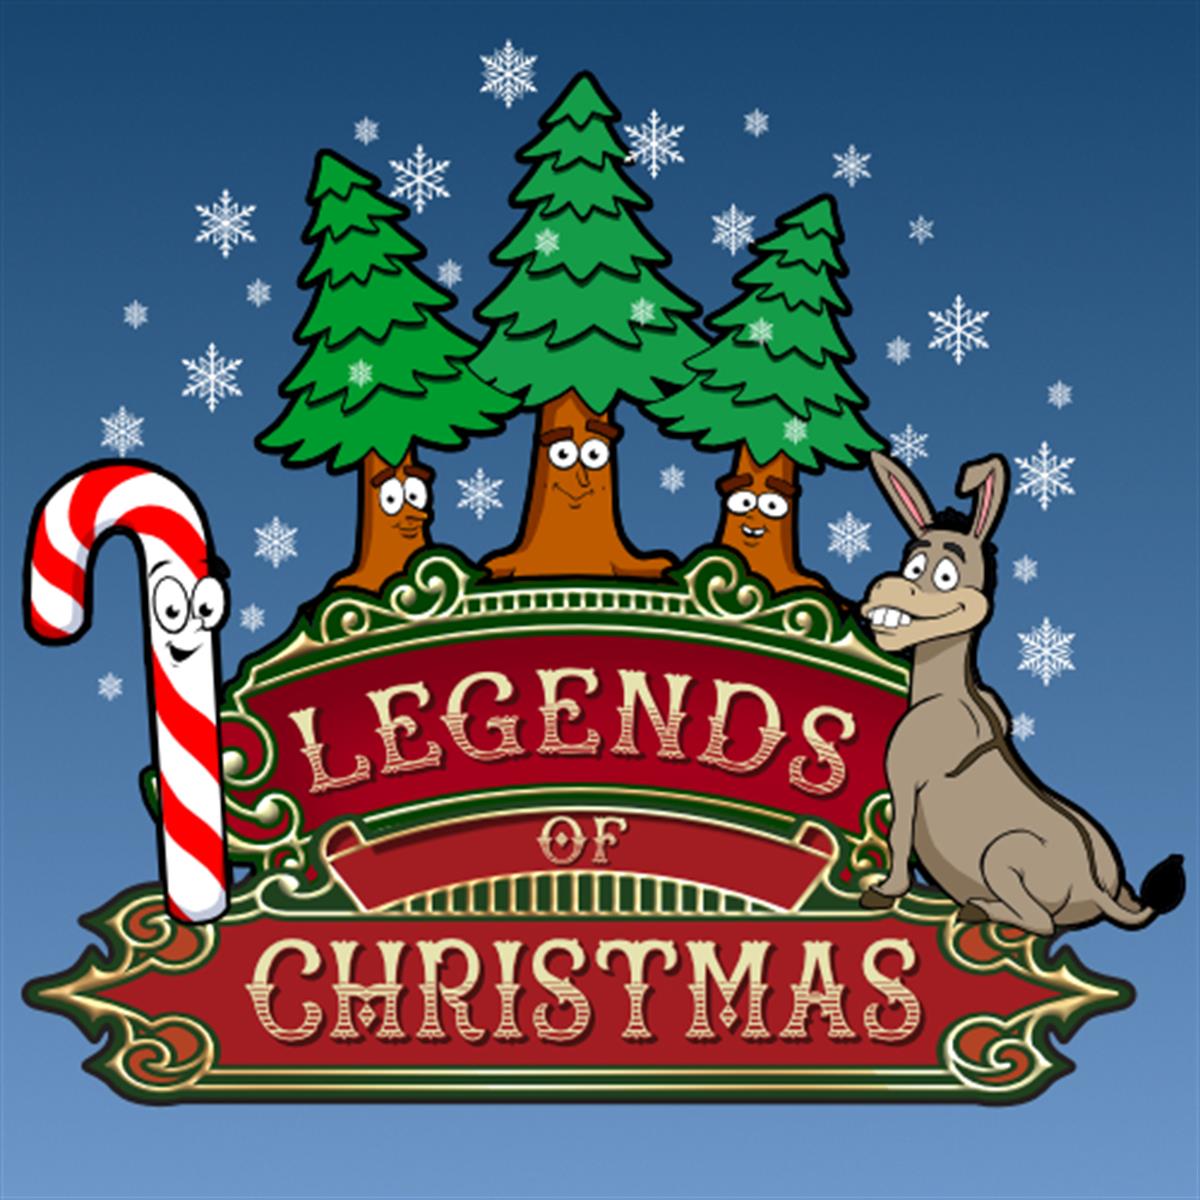 Christmas 4 Kids: The Legends of Christmas 2021 Atkinson Area Chamber of Commerce, WI